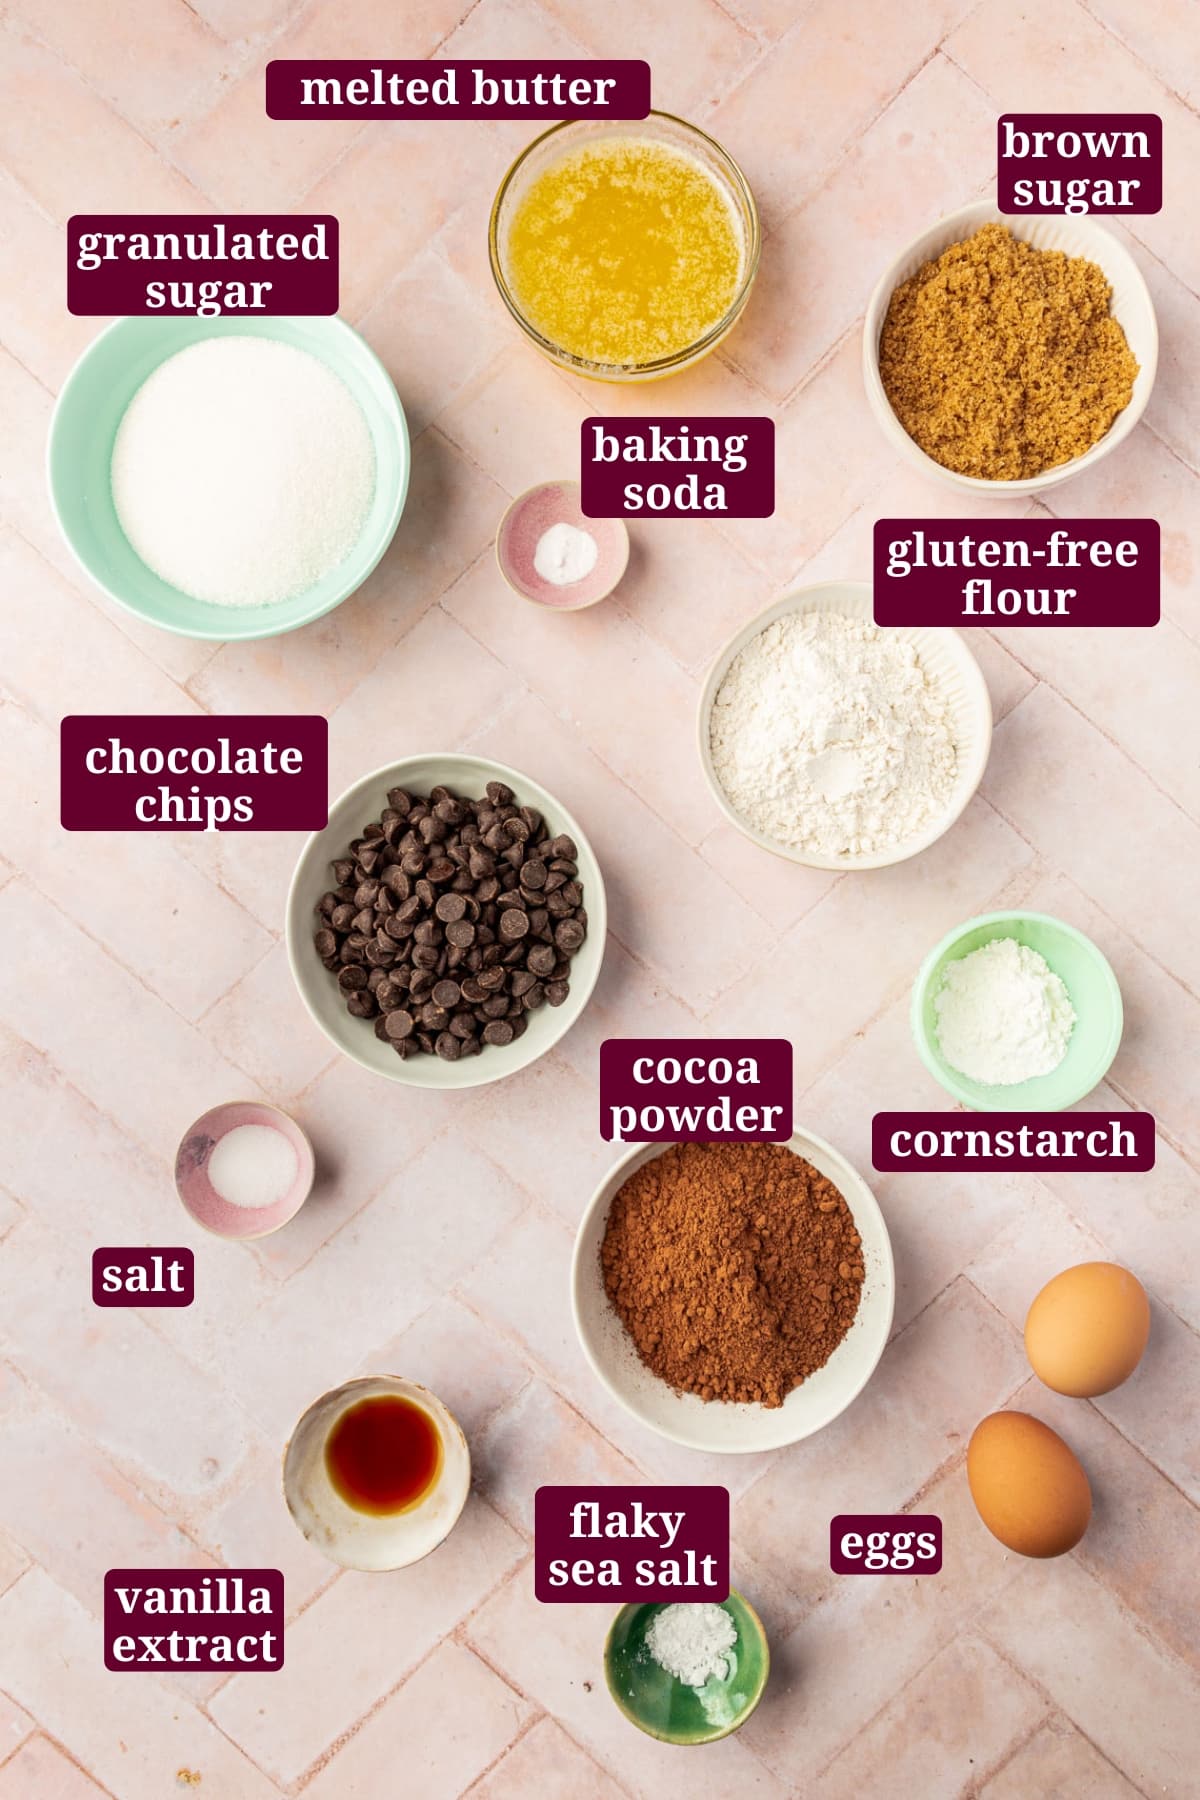 An overhead view of ingredients in small bowls to make gluten-free brownies, including granulated sugar, melted butter, brown sugar, baking soda, gluten-free flour, chocolate chips, cocoa powder, cornstarch, eggs, and vanilla extract, with text overlays over each ingredient.